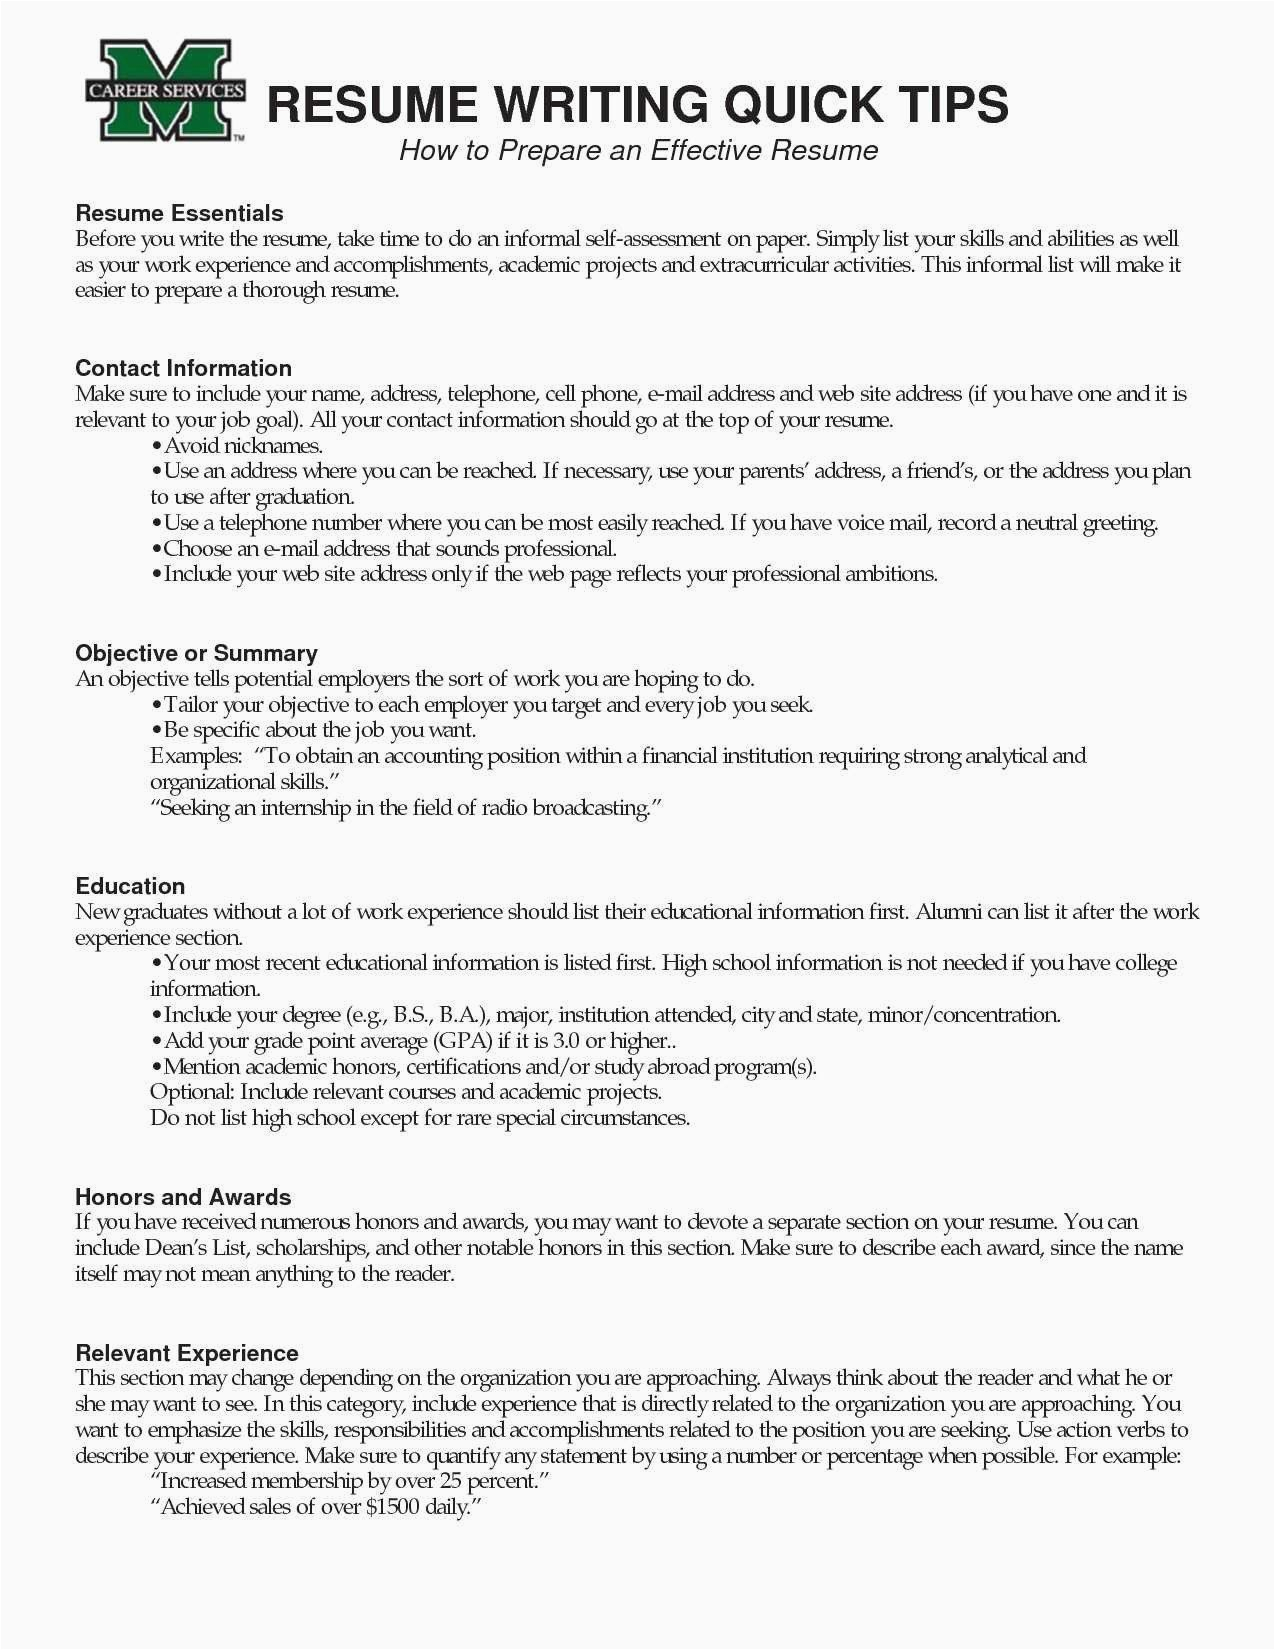 Co Curricular Activities In Resume Sample Extra Curricular Activities for Resume Beautiful 9 10 Co